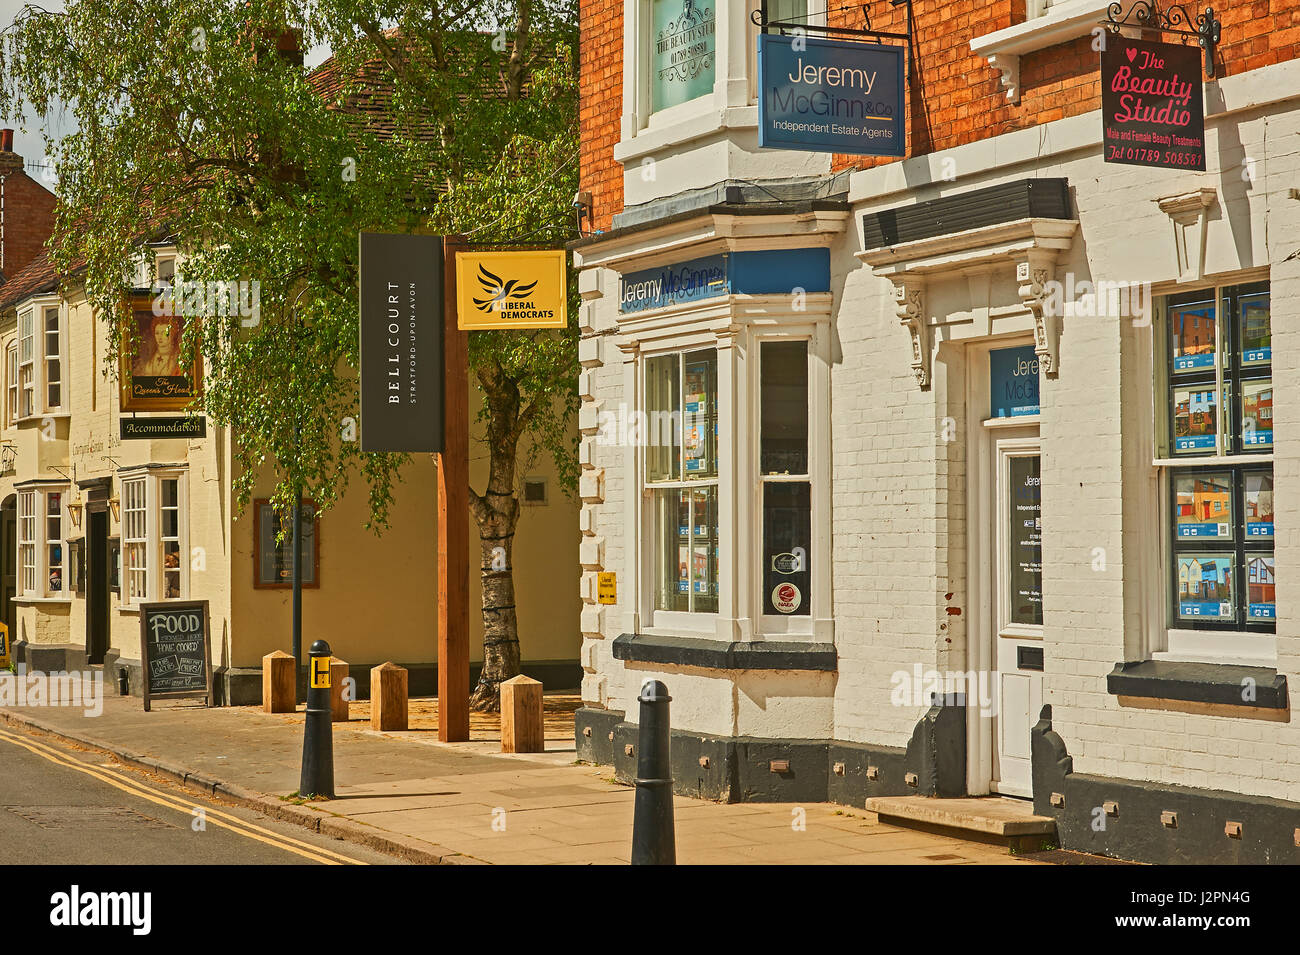 A street scene in Stratford upon Avon, Warwickshire with different businesses in the street. Stock Photo